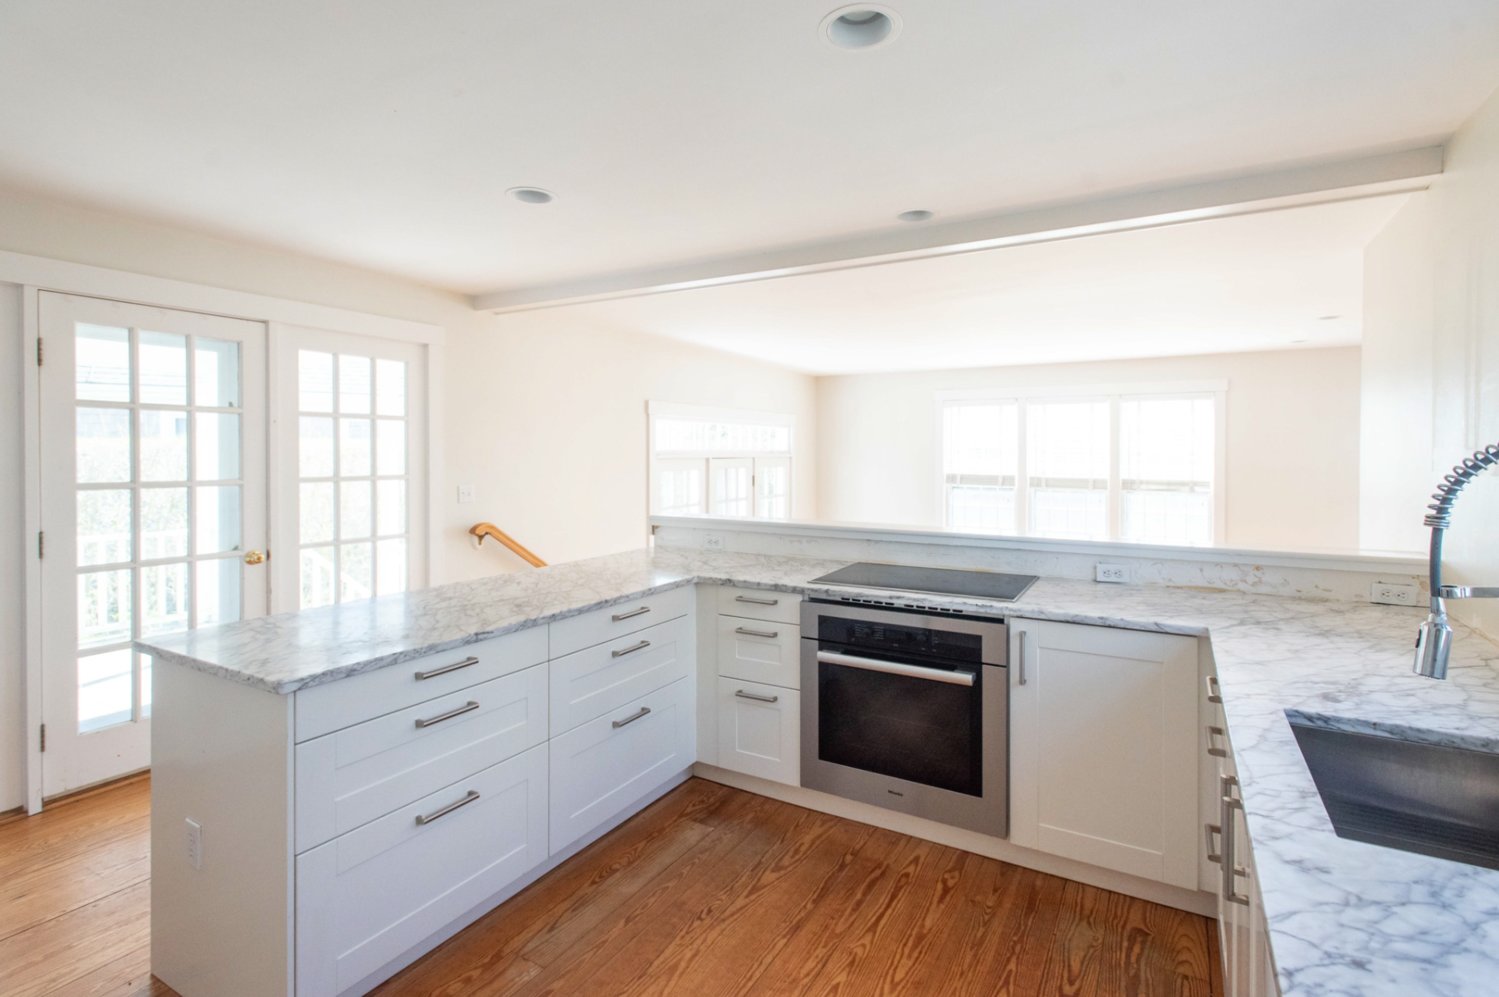 The kitchen of this Goldfinch Drive home was recently renovated with Italian marble countertops and new appliances, including a Miele stove.